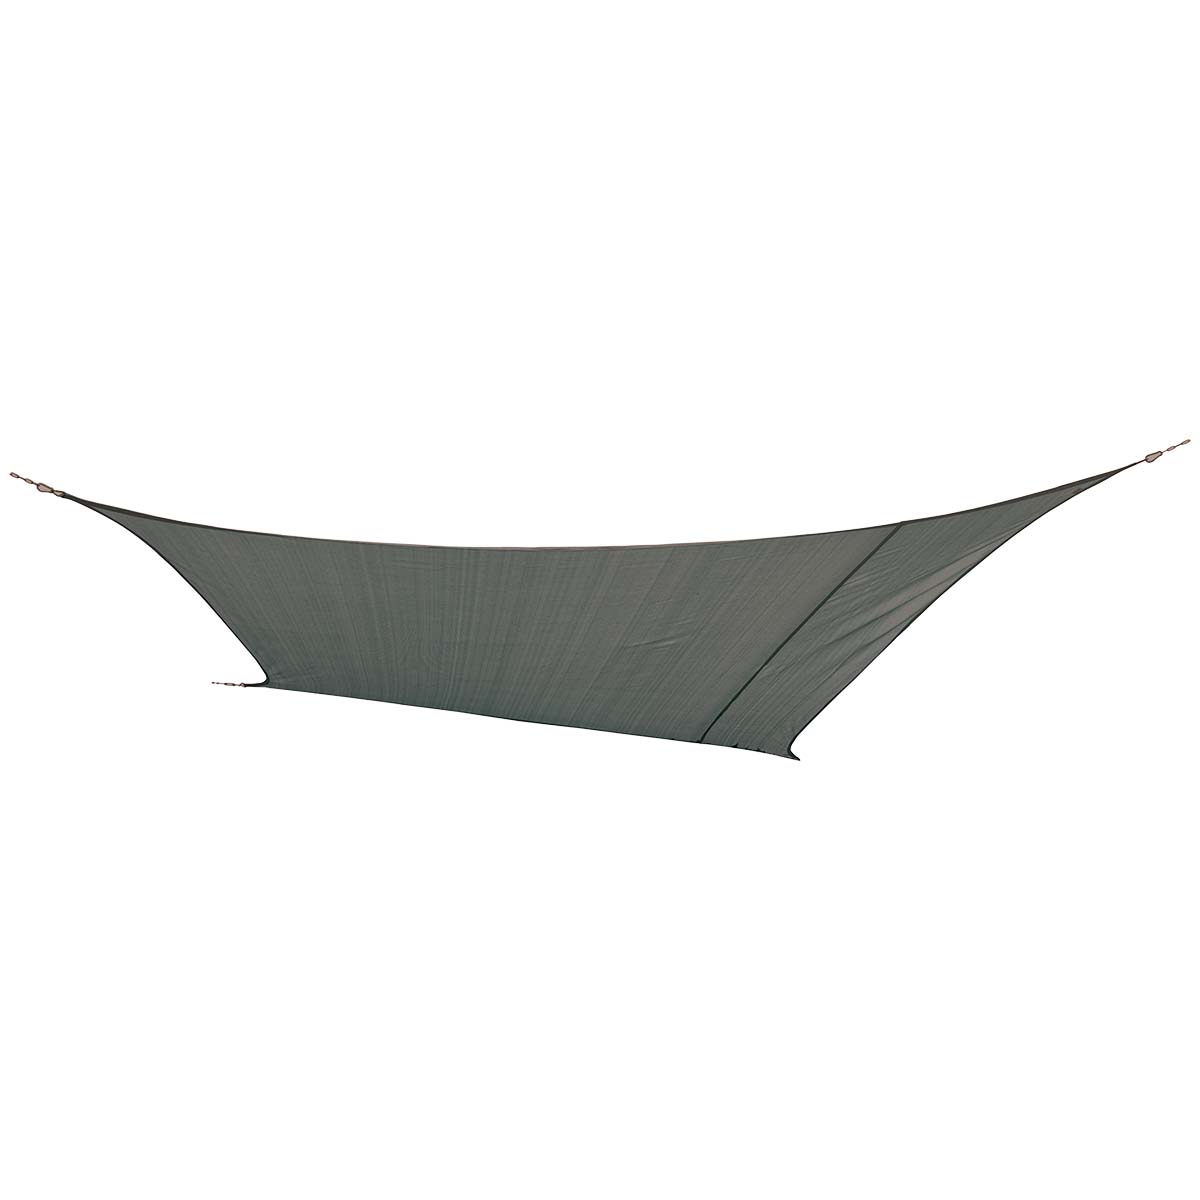 4471442 "A light-transmitting diamond shaped shade cloth. This UV resistant fabric protects against the heat of the sun and reduces the risk of burning. Through the sturdy tensioning eyes this shade cloth is easy to attach as desired. A high-quality shade cloth made from 180 gr/m² 'high density polyethylene' (HDPE). Including handy carry bag (excluding tarpaulin poles)."